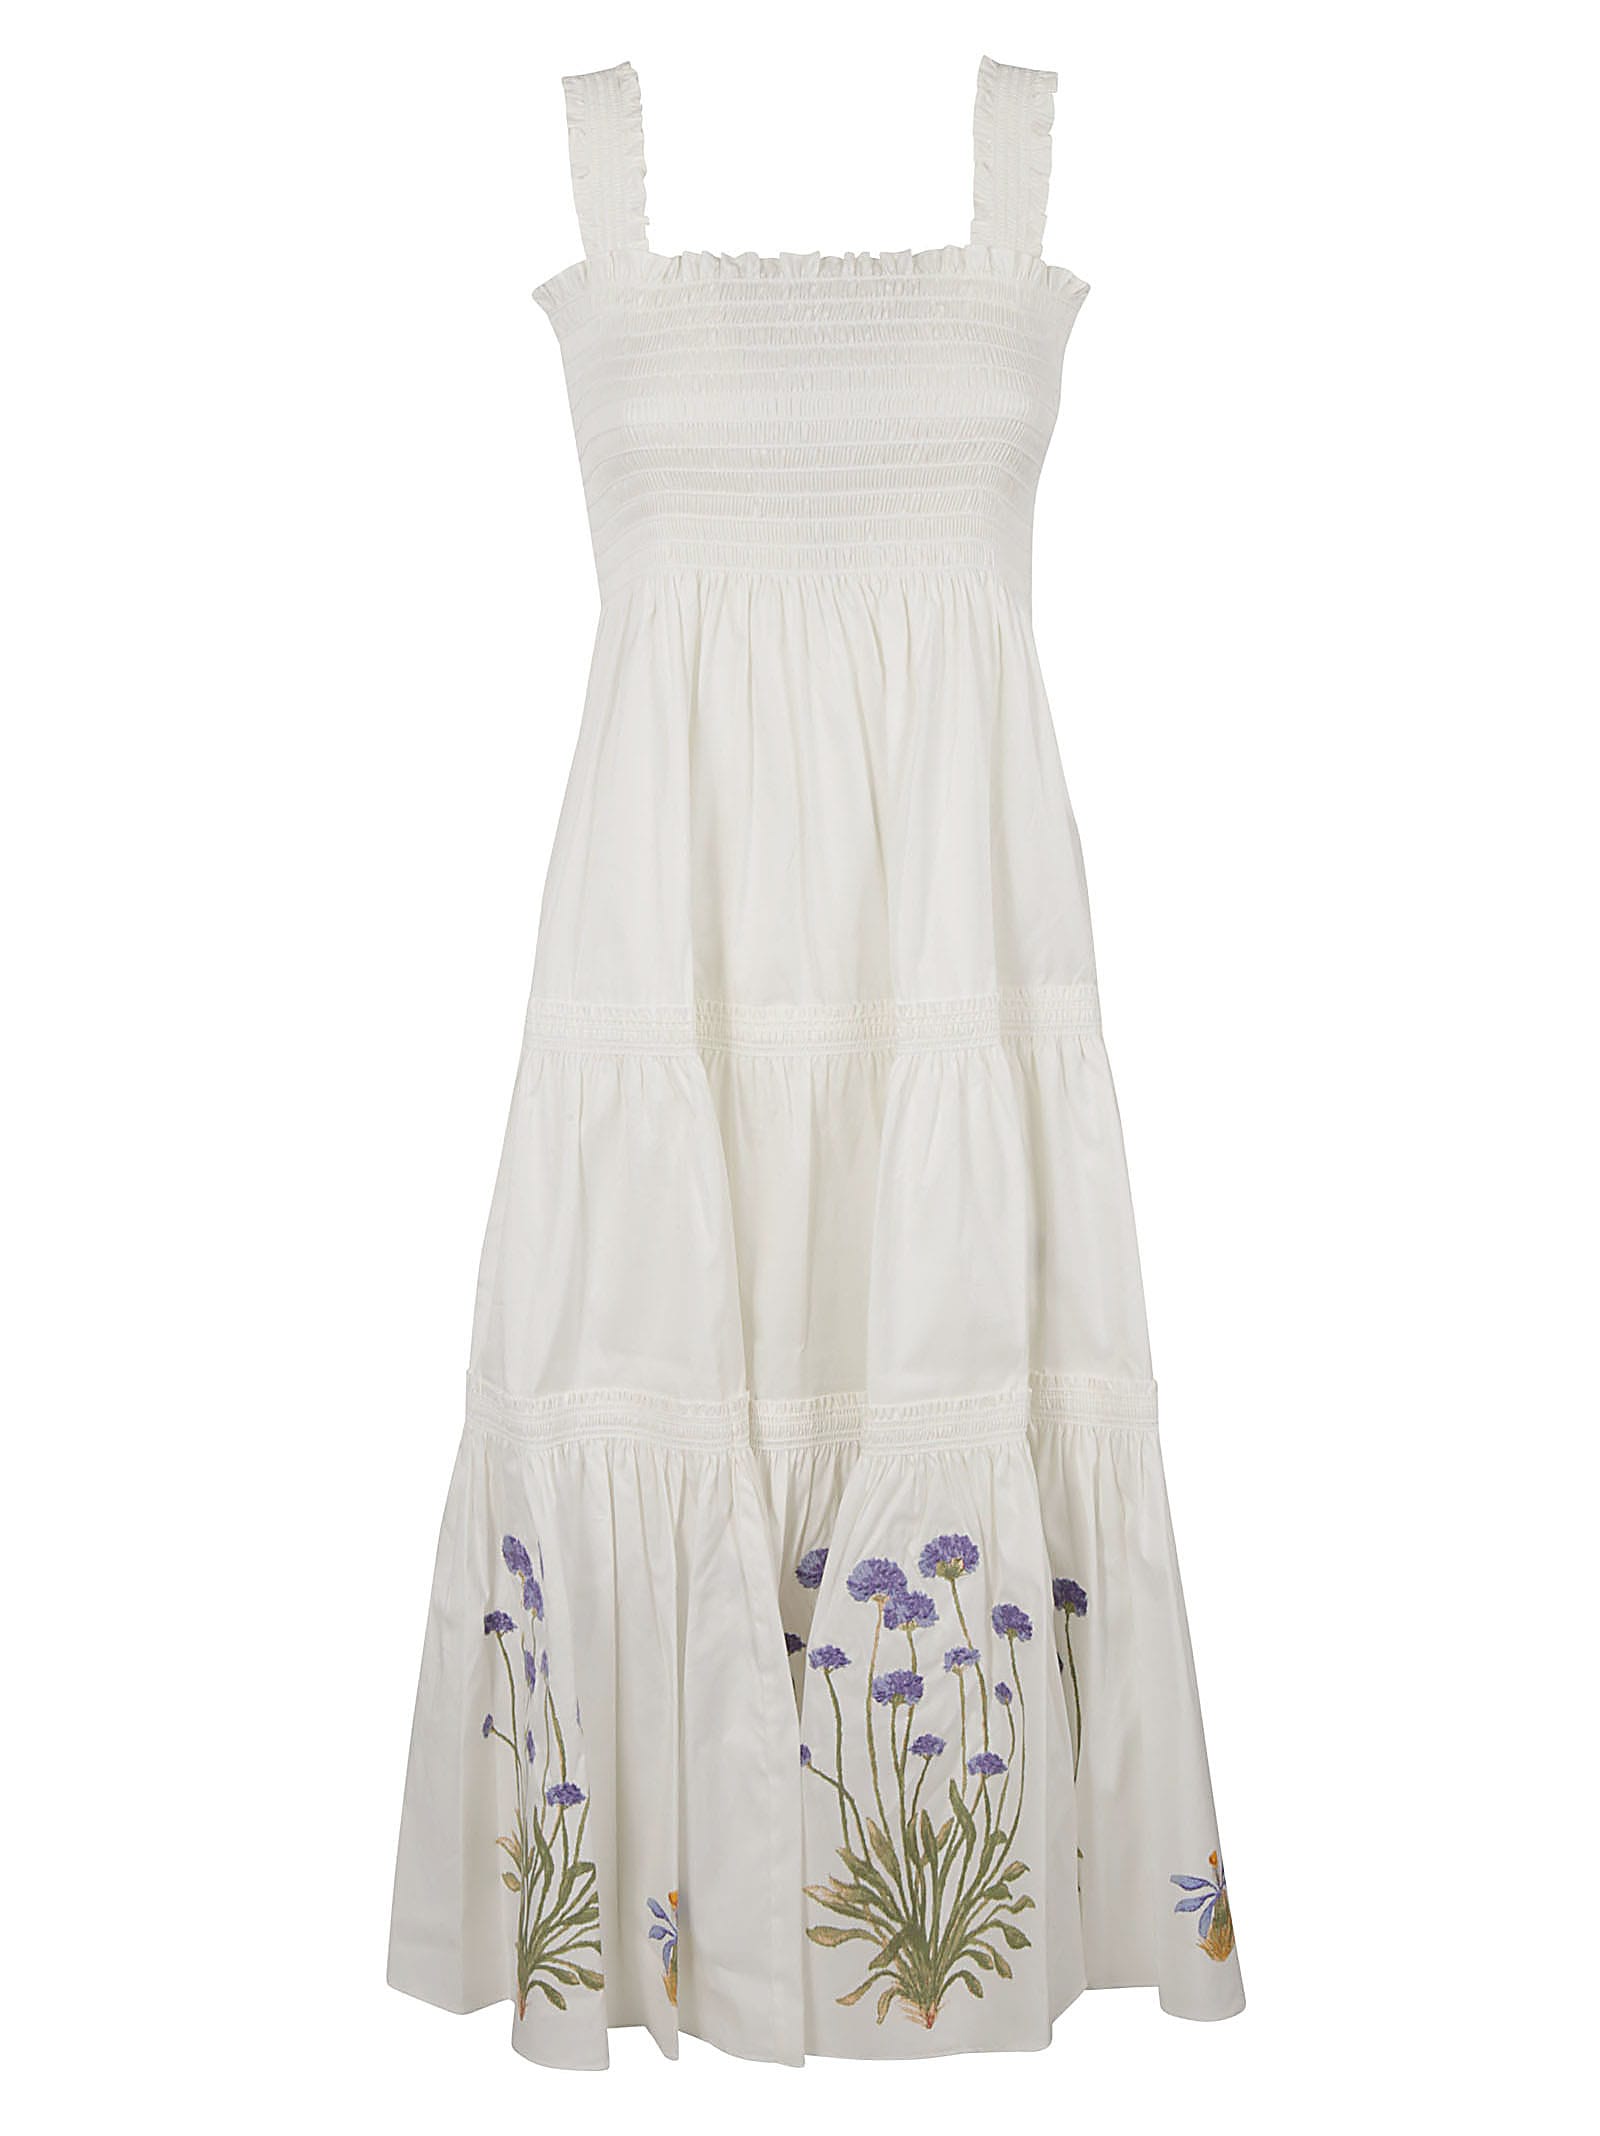 Tory Burch Embroidered Smocked Midi Dress